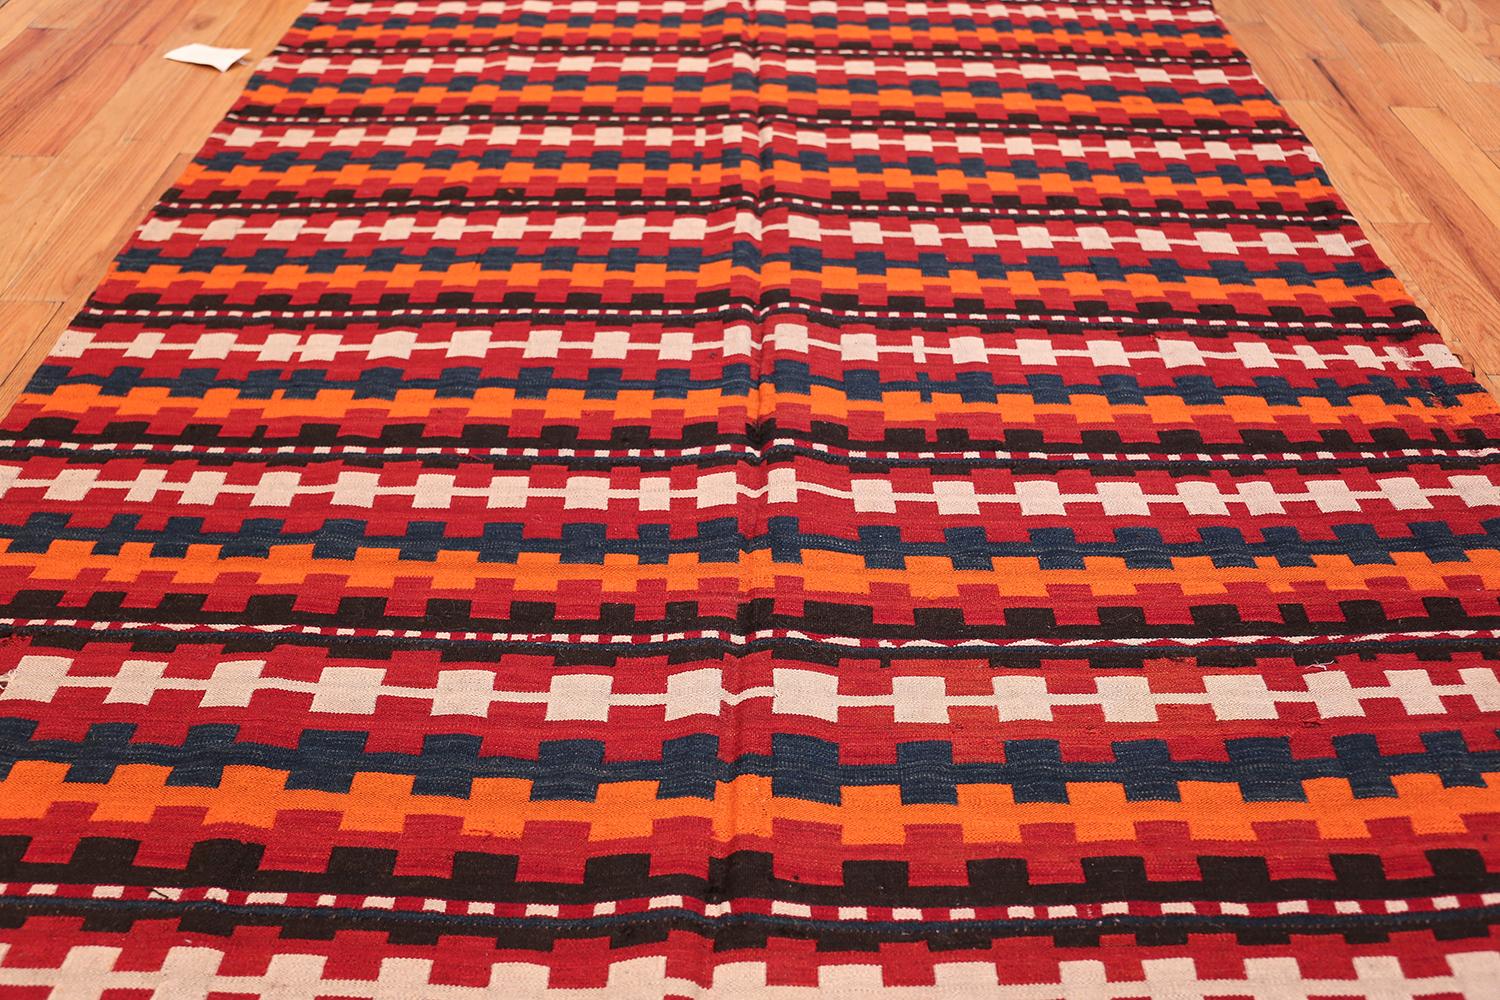 20th Century Vintage Tribal Caucasian Kilim Rug. Size: 5 ft 6 in x 9 ft (1.68 m x 2.74 m)